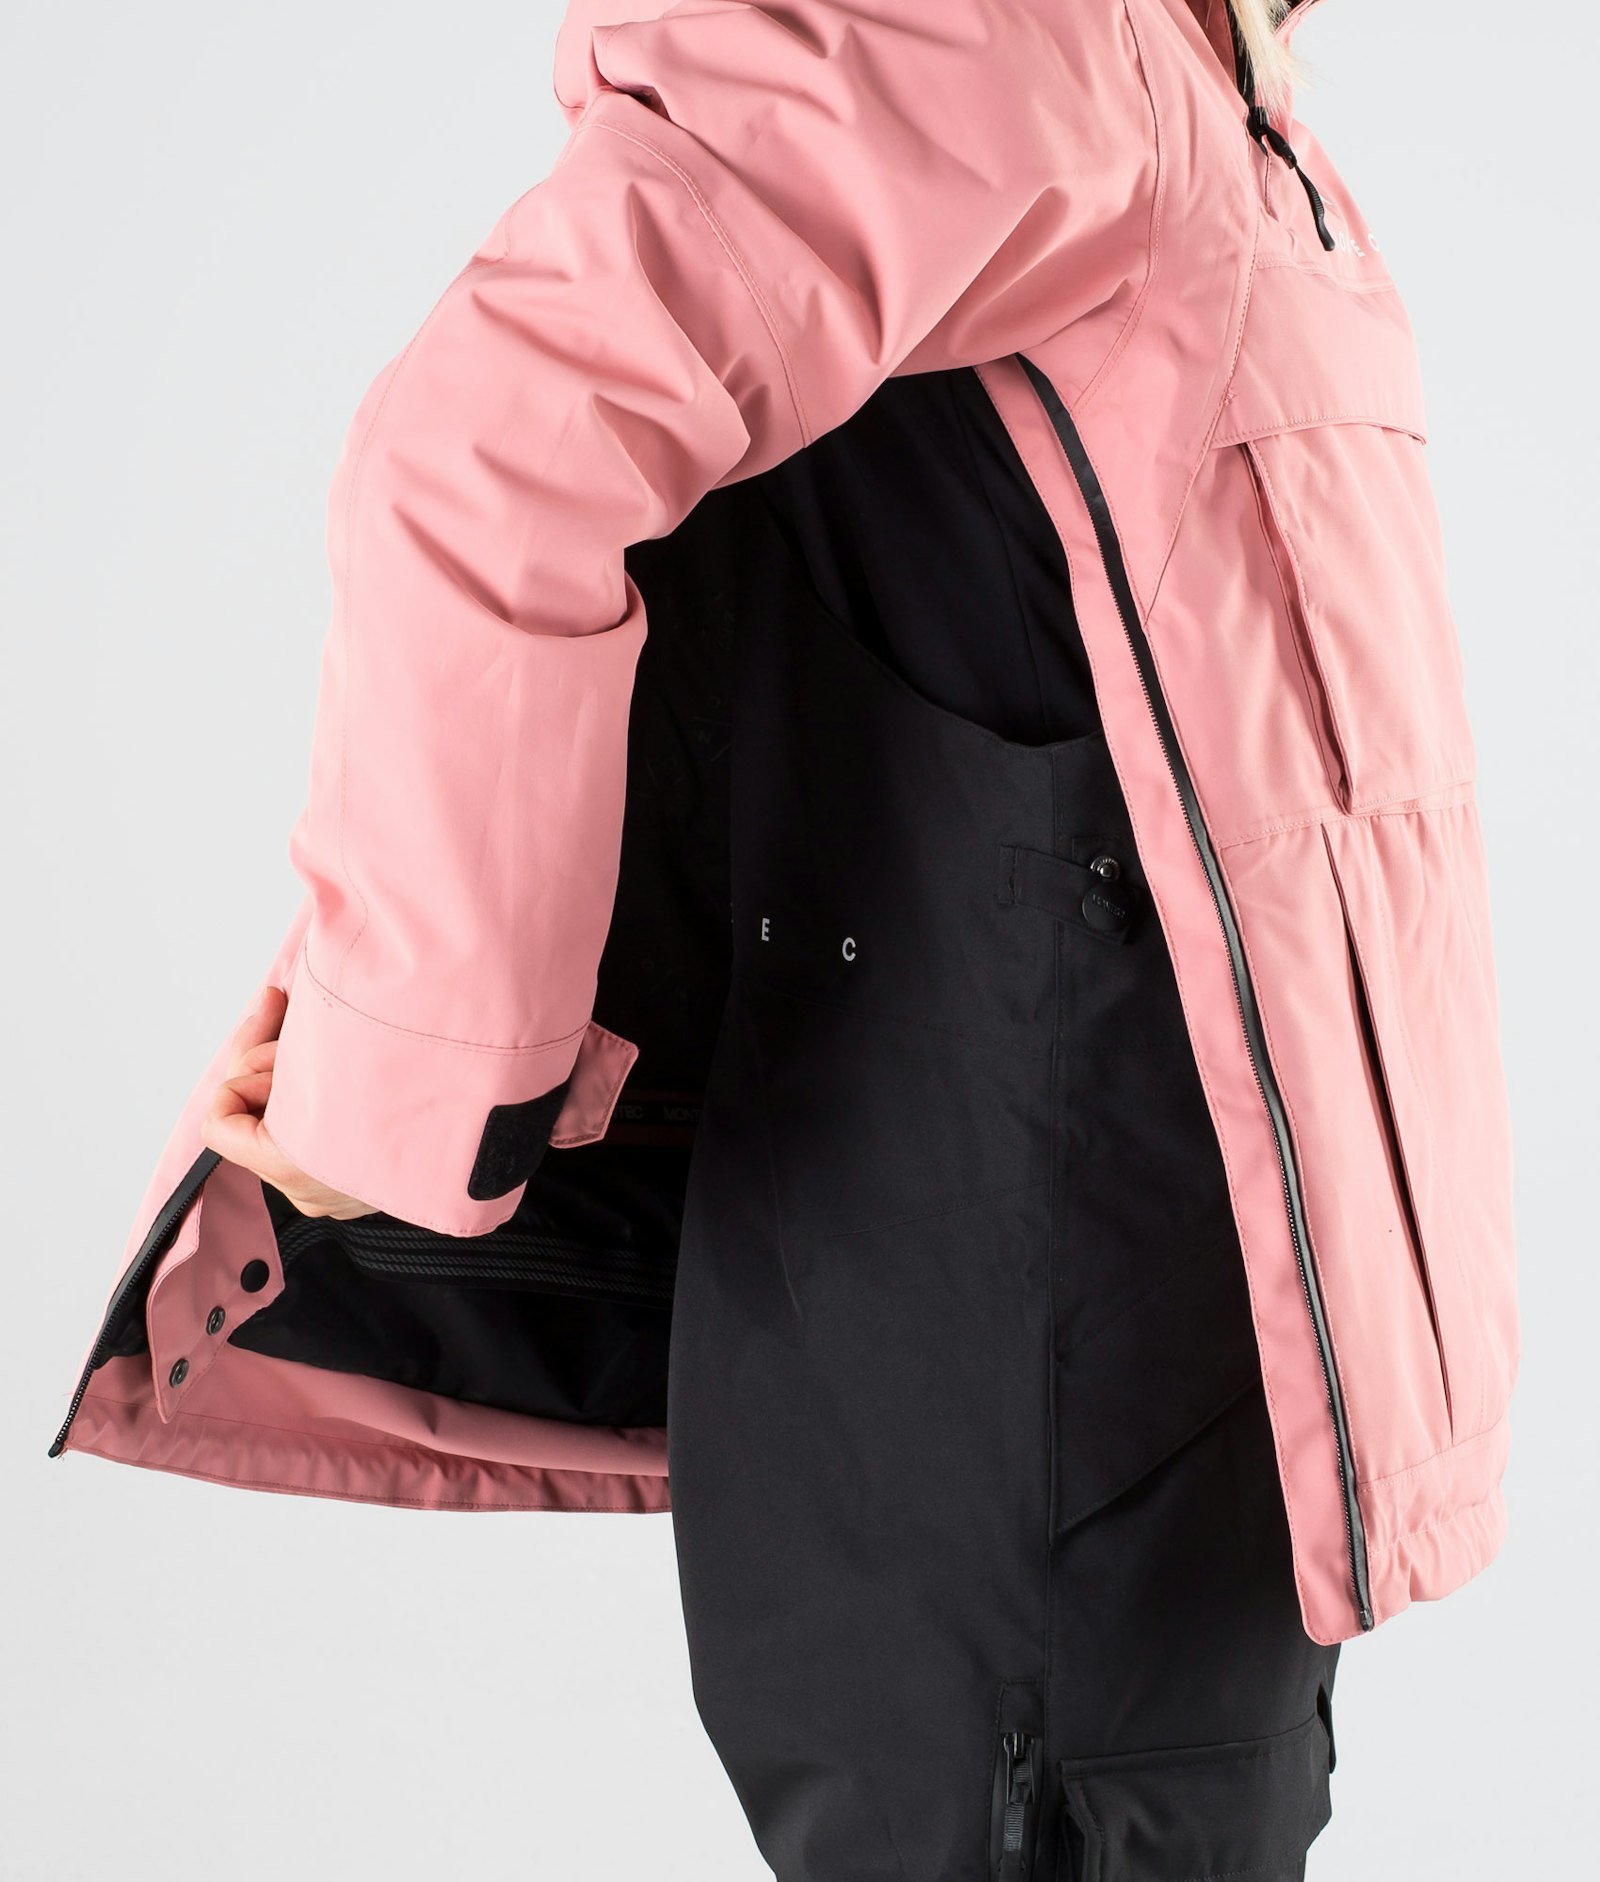 Montec Dune W 2019 Giacca Snowboard Donna Pink